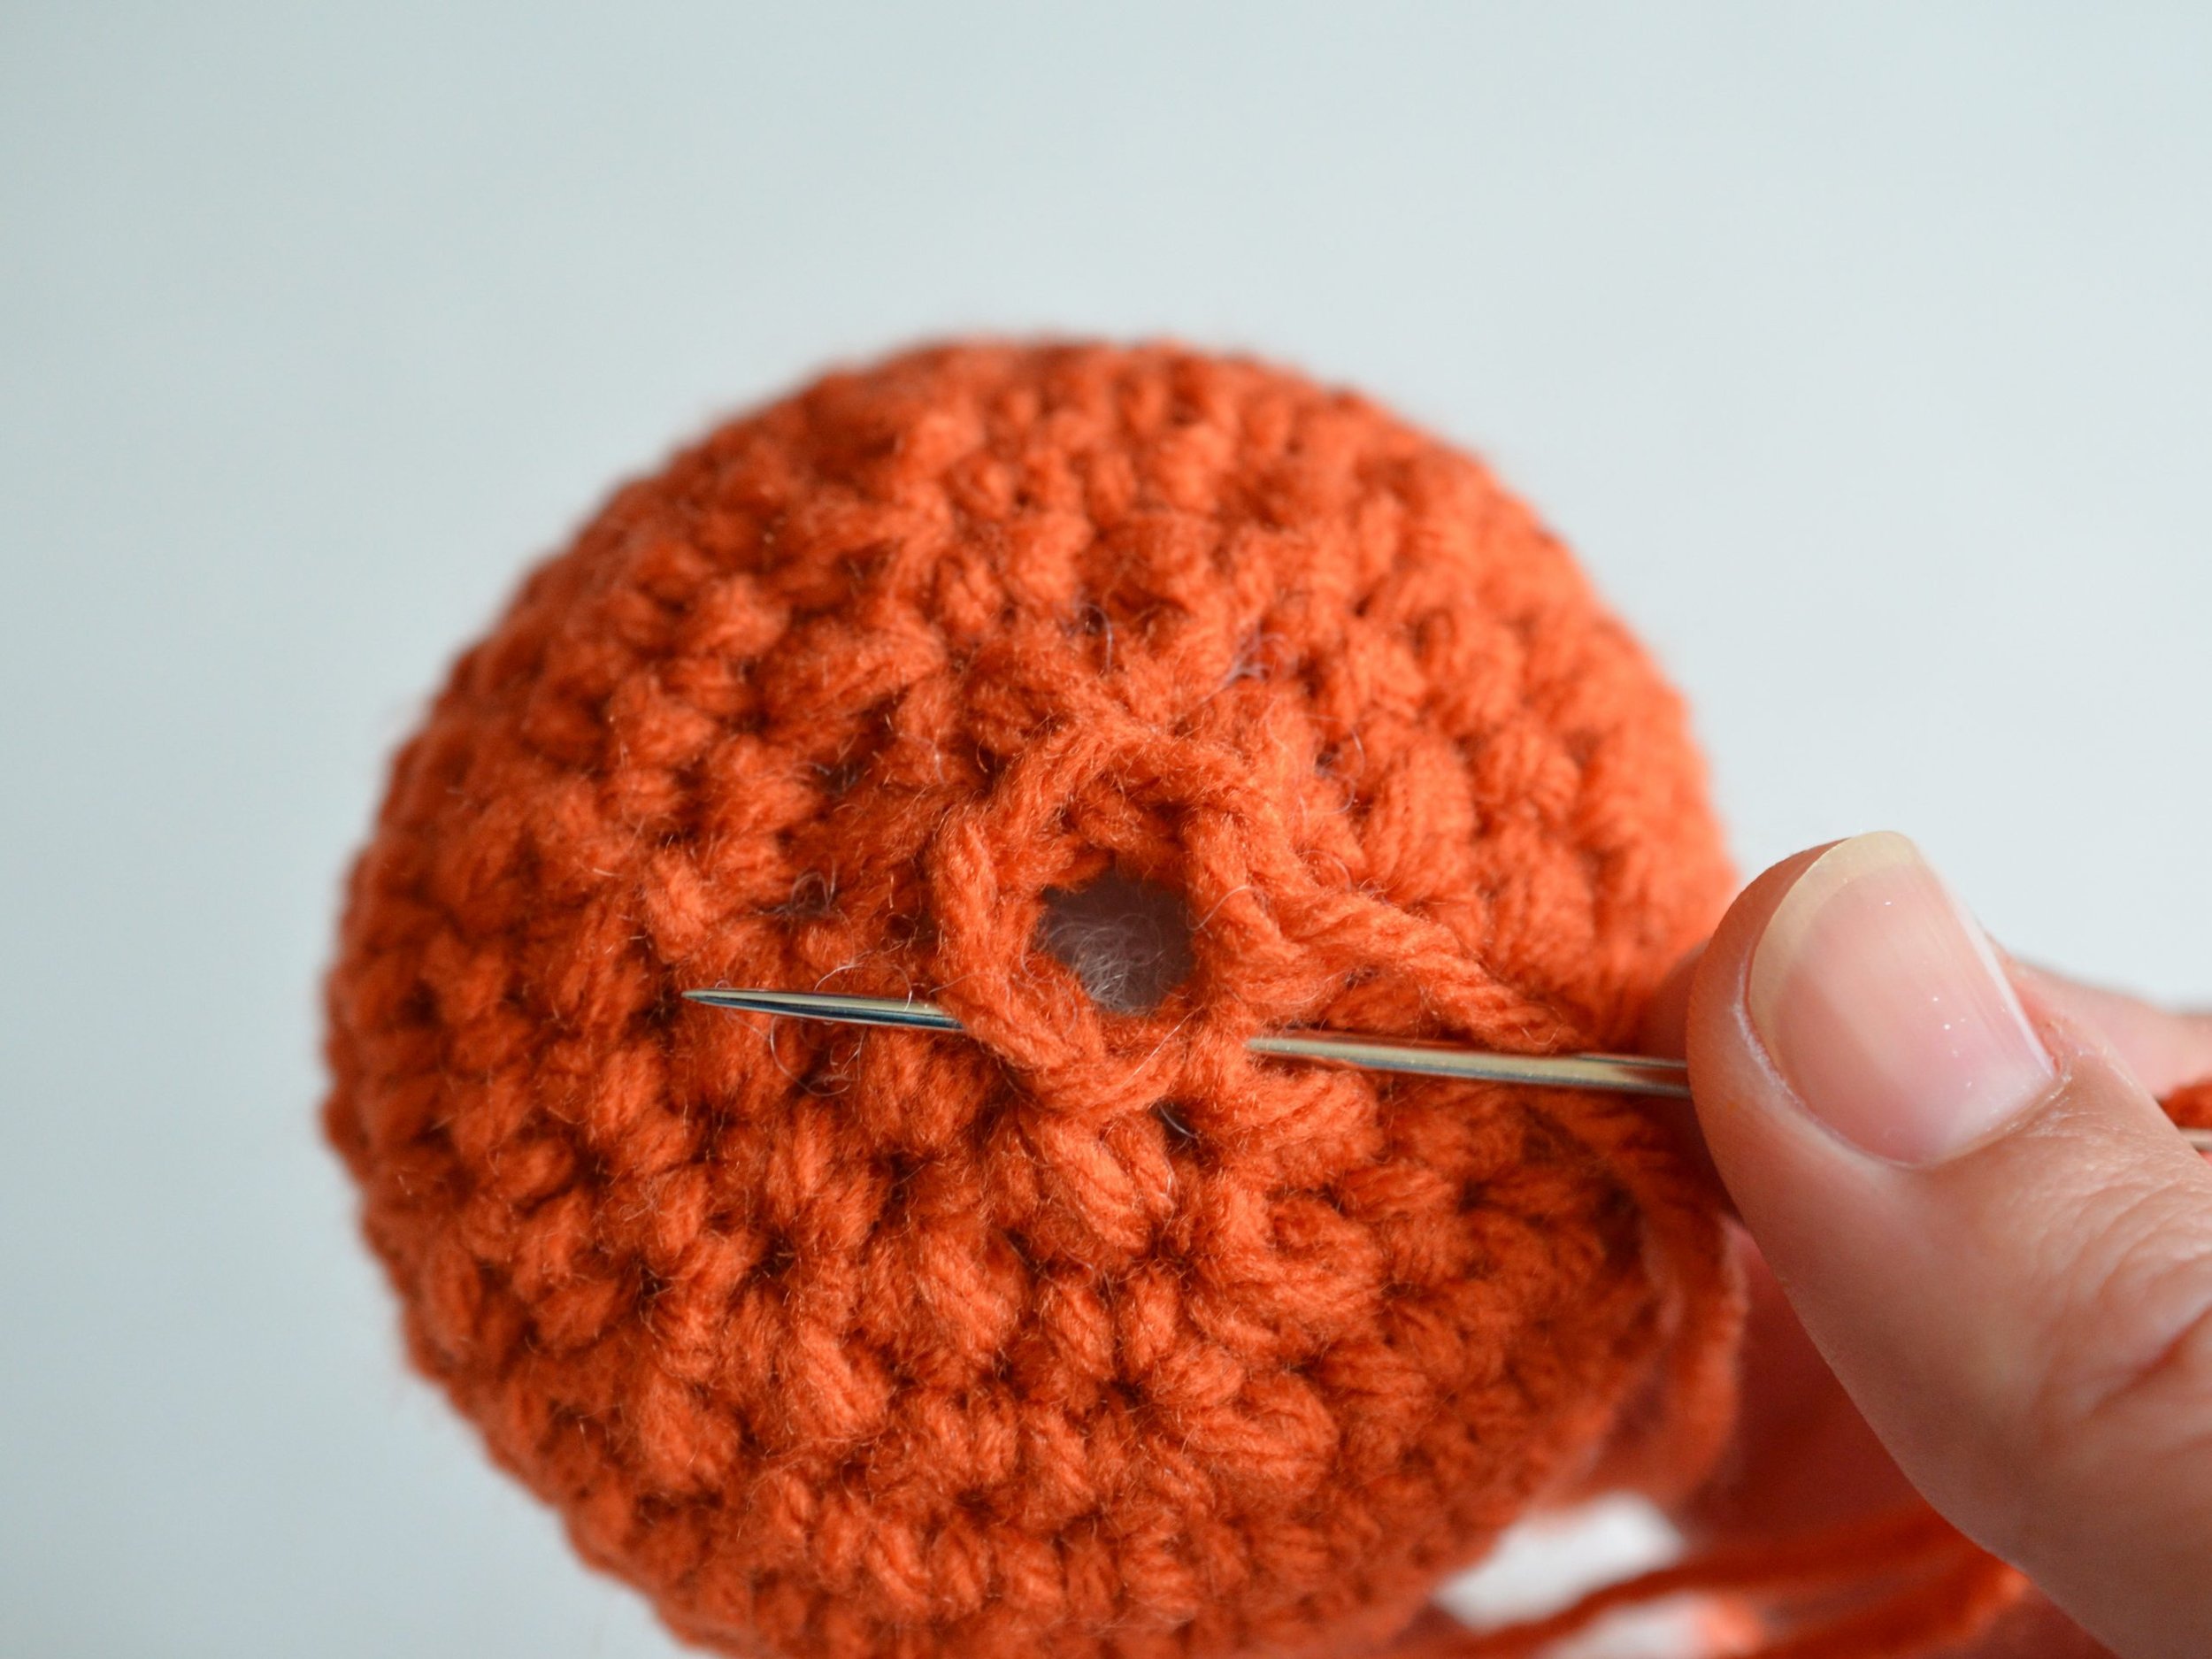 Crochet Basics - How to Work in the Round (Inc) — Pops de Milk - Fun and  Nerdy Crochet Patterns